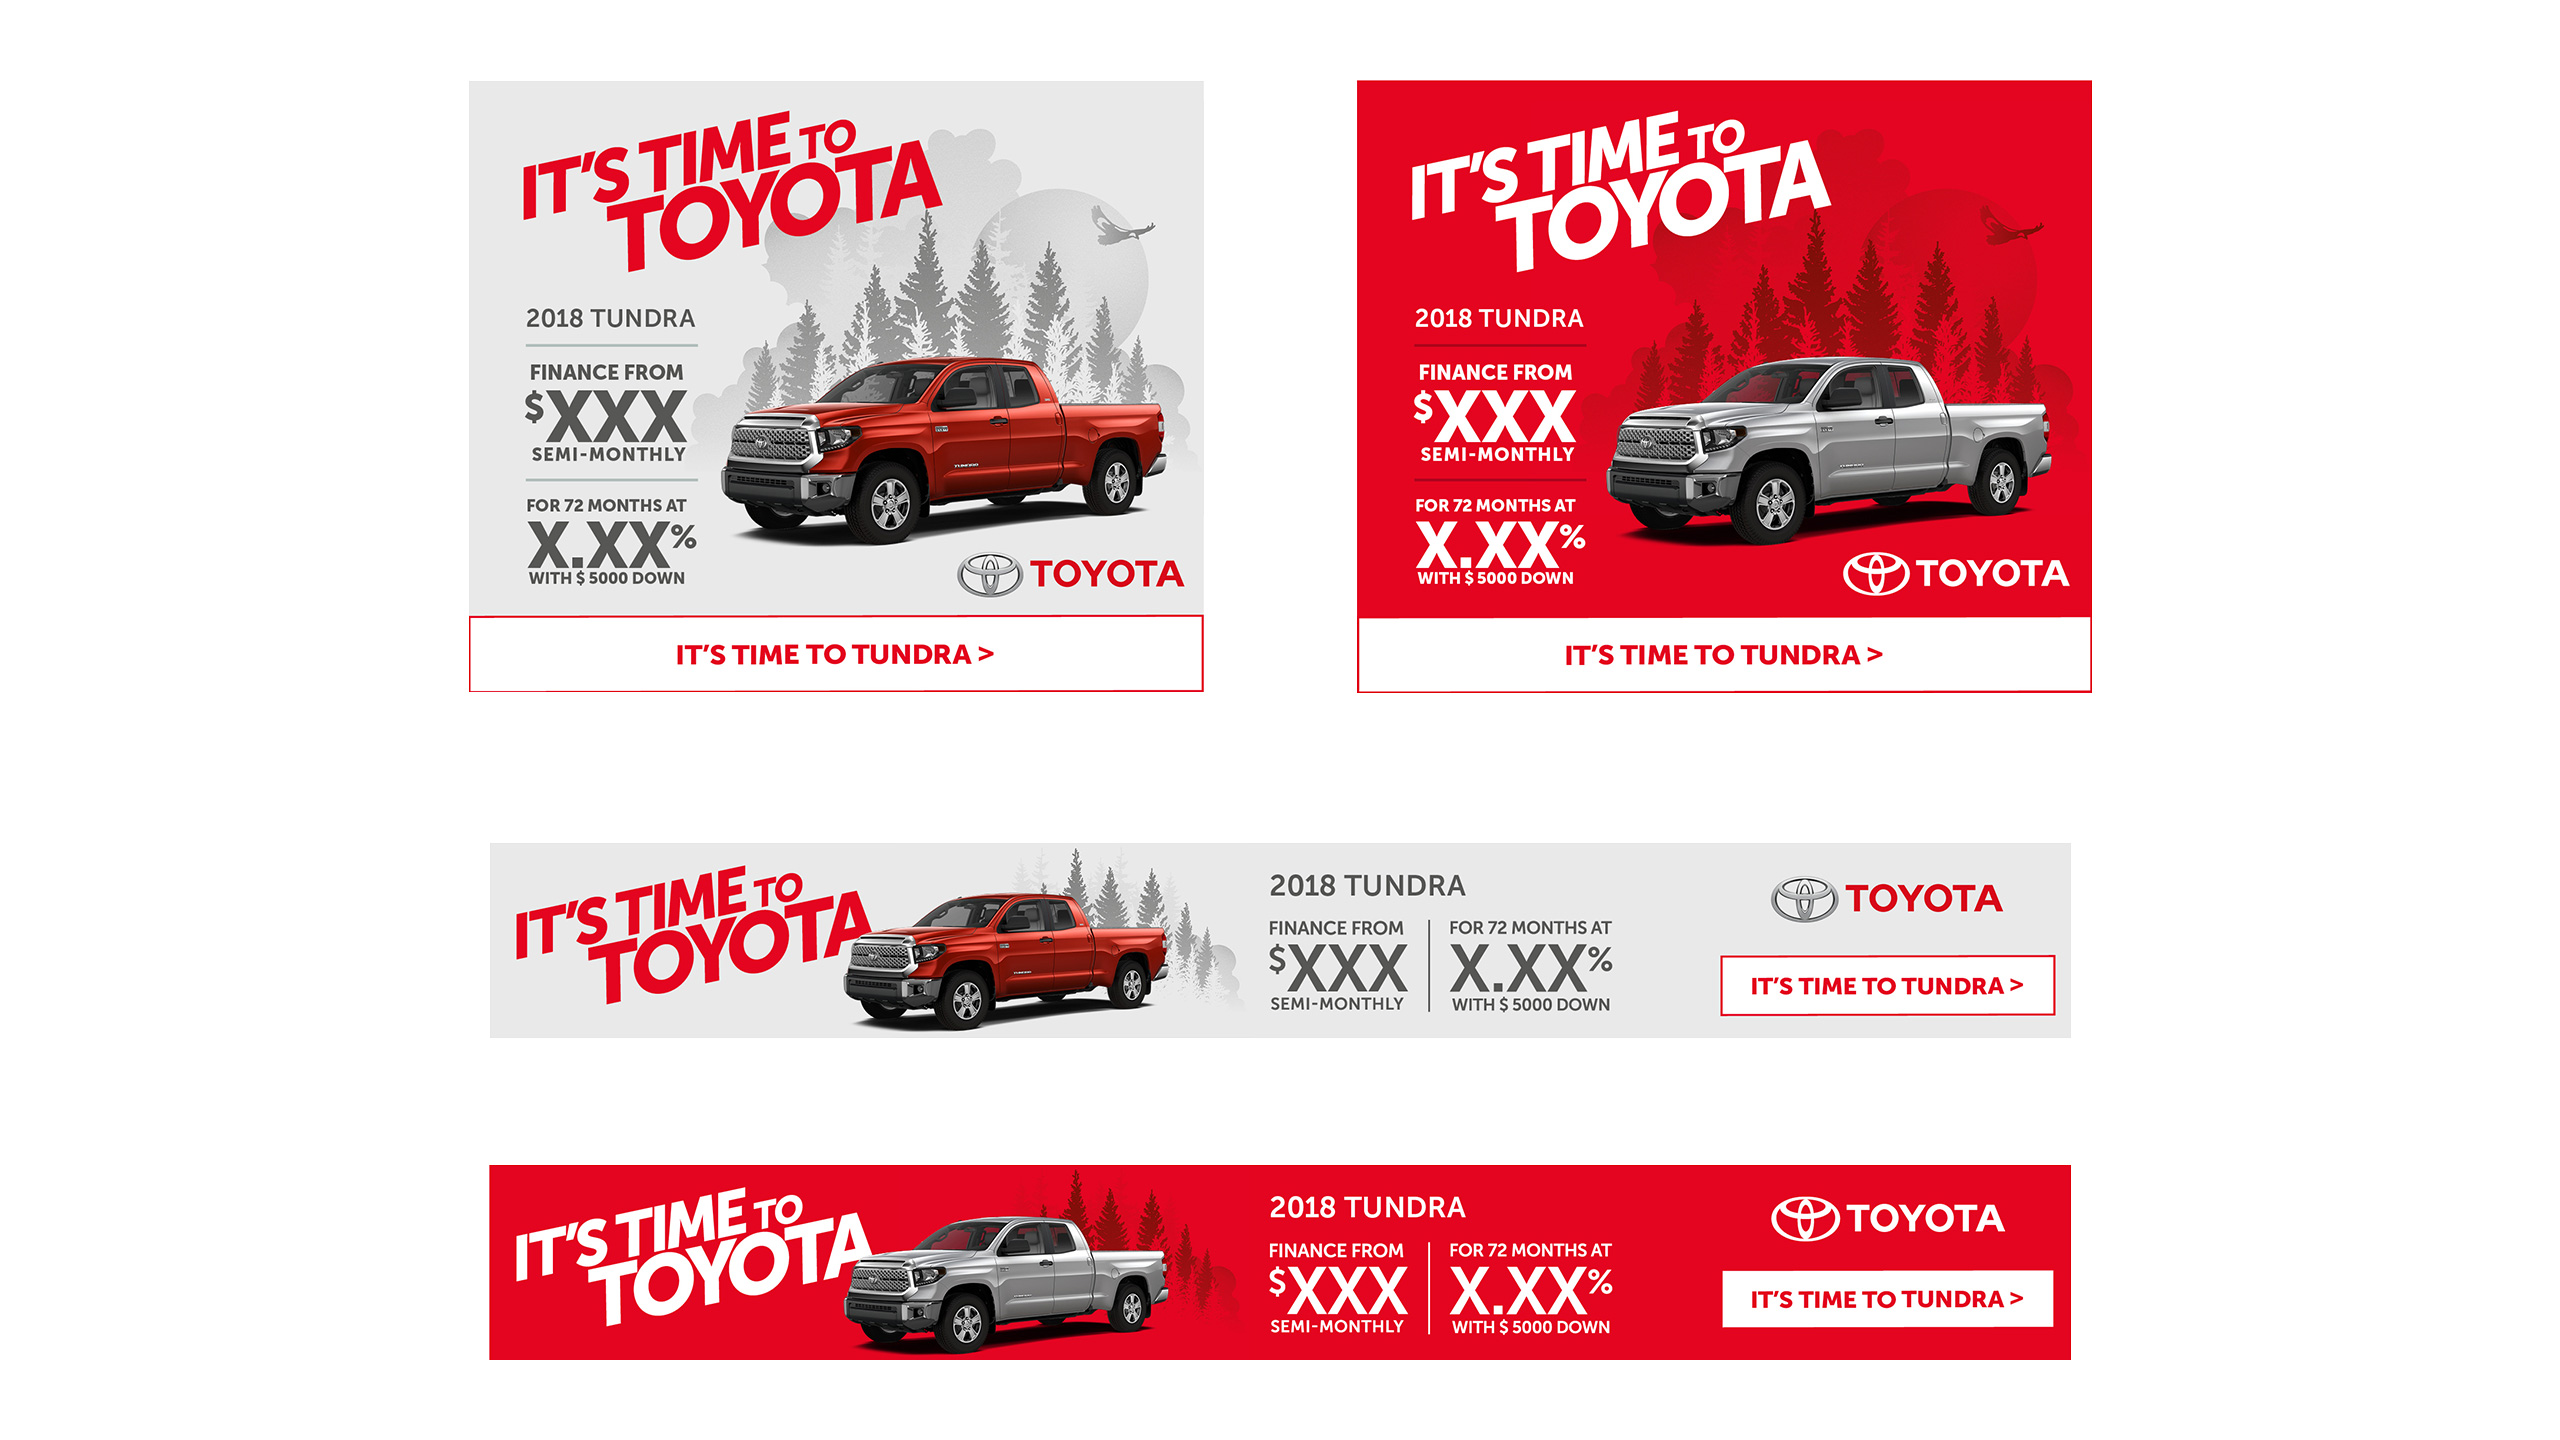 Digital Art Direction for Toyota by The Coopers